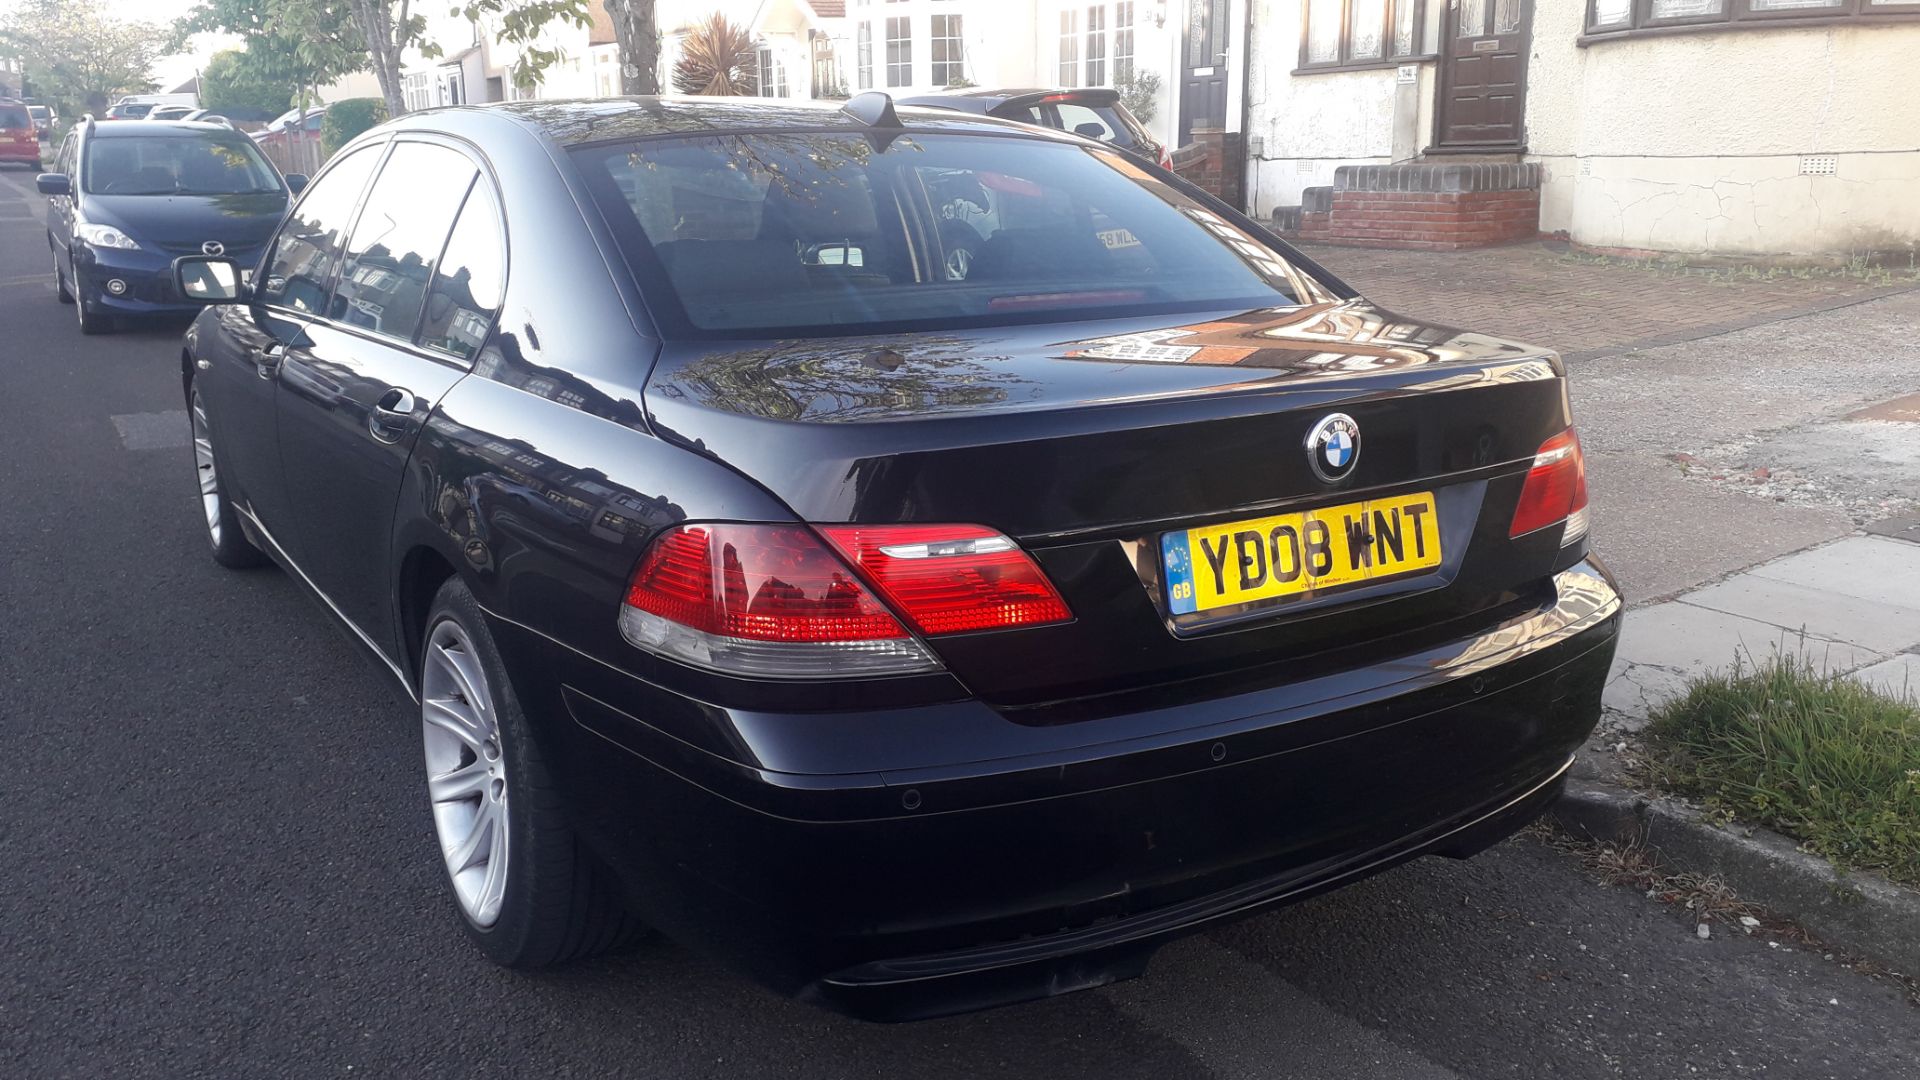 BMW 730Ld SE 4 Door Auto Saloon, colour black, registration YD08 WNT, first registered 21 March - Image 31 of 32